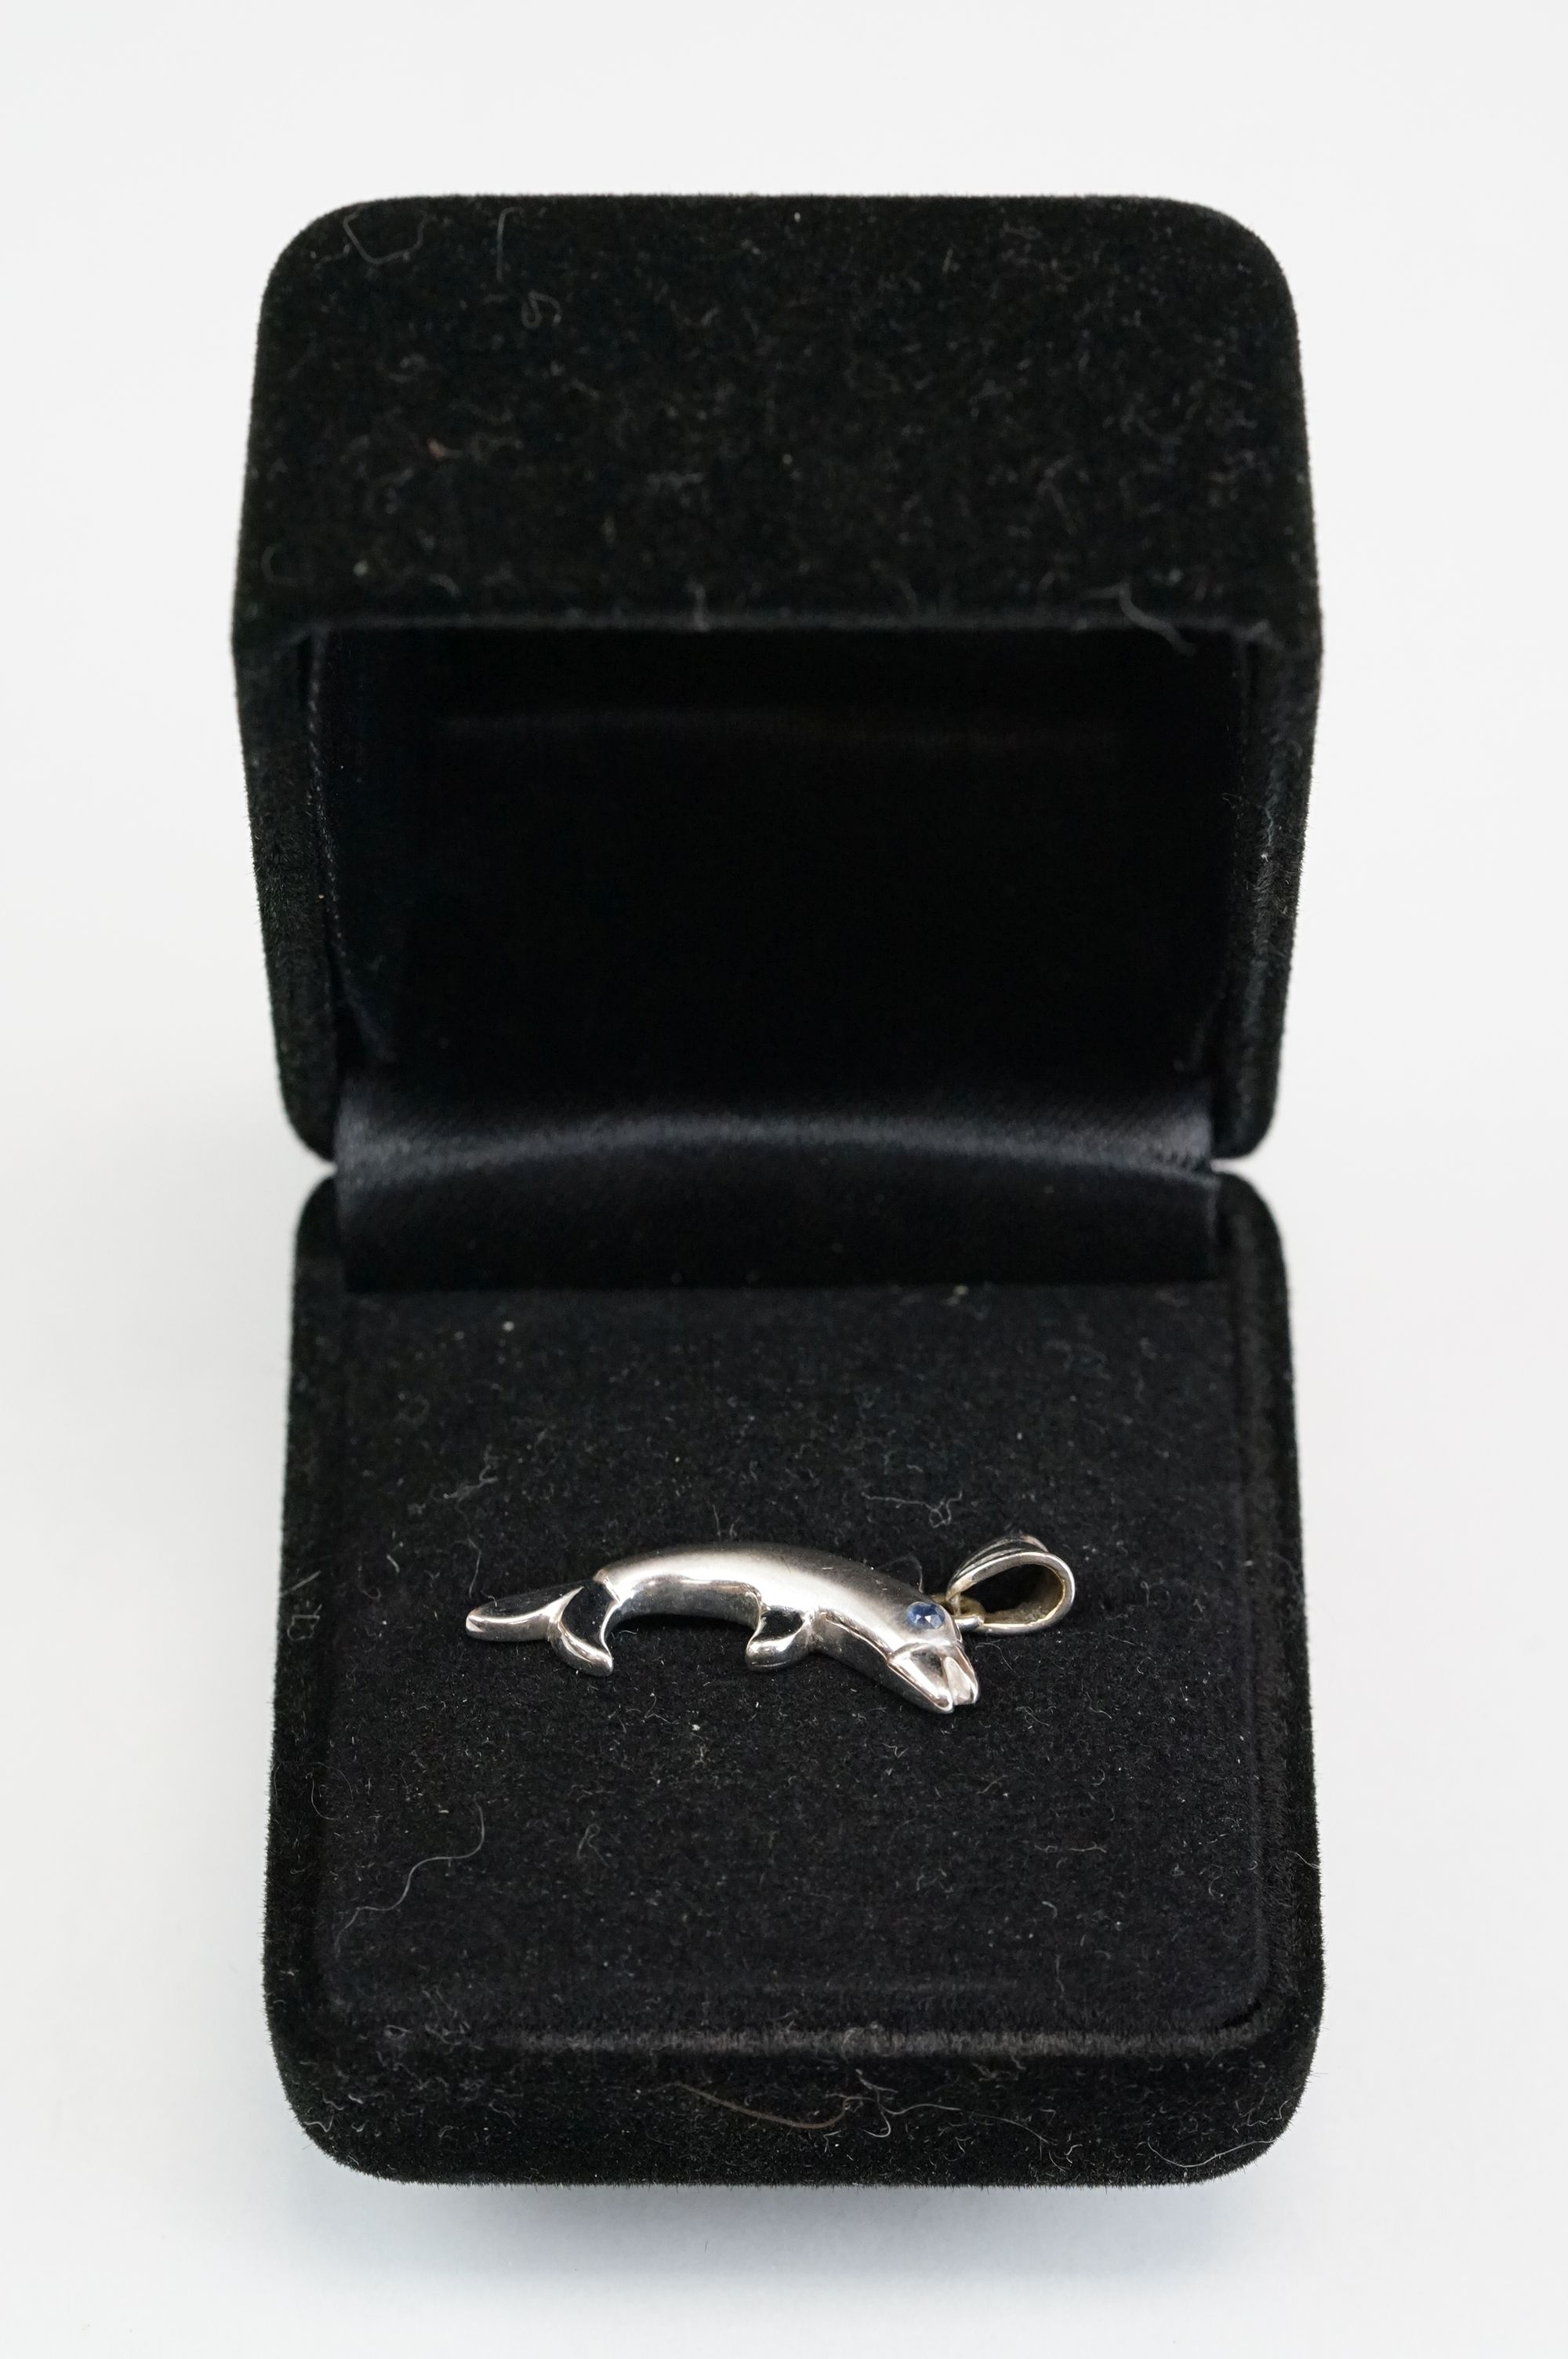 14ct white gold pendant modelled as a dolphin with sapphire eye, length approx 2.5cm - Image 5 of 5